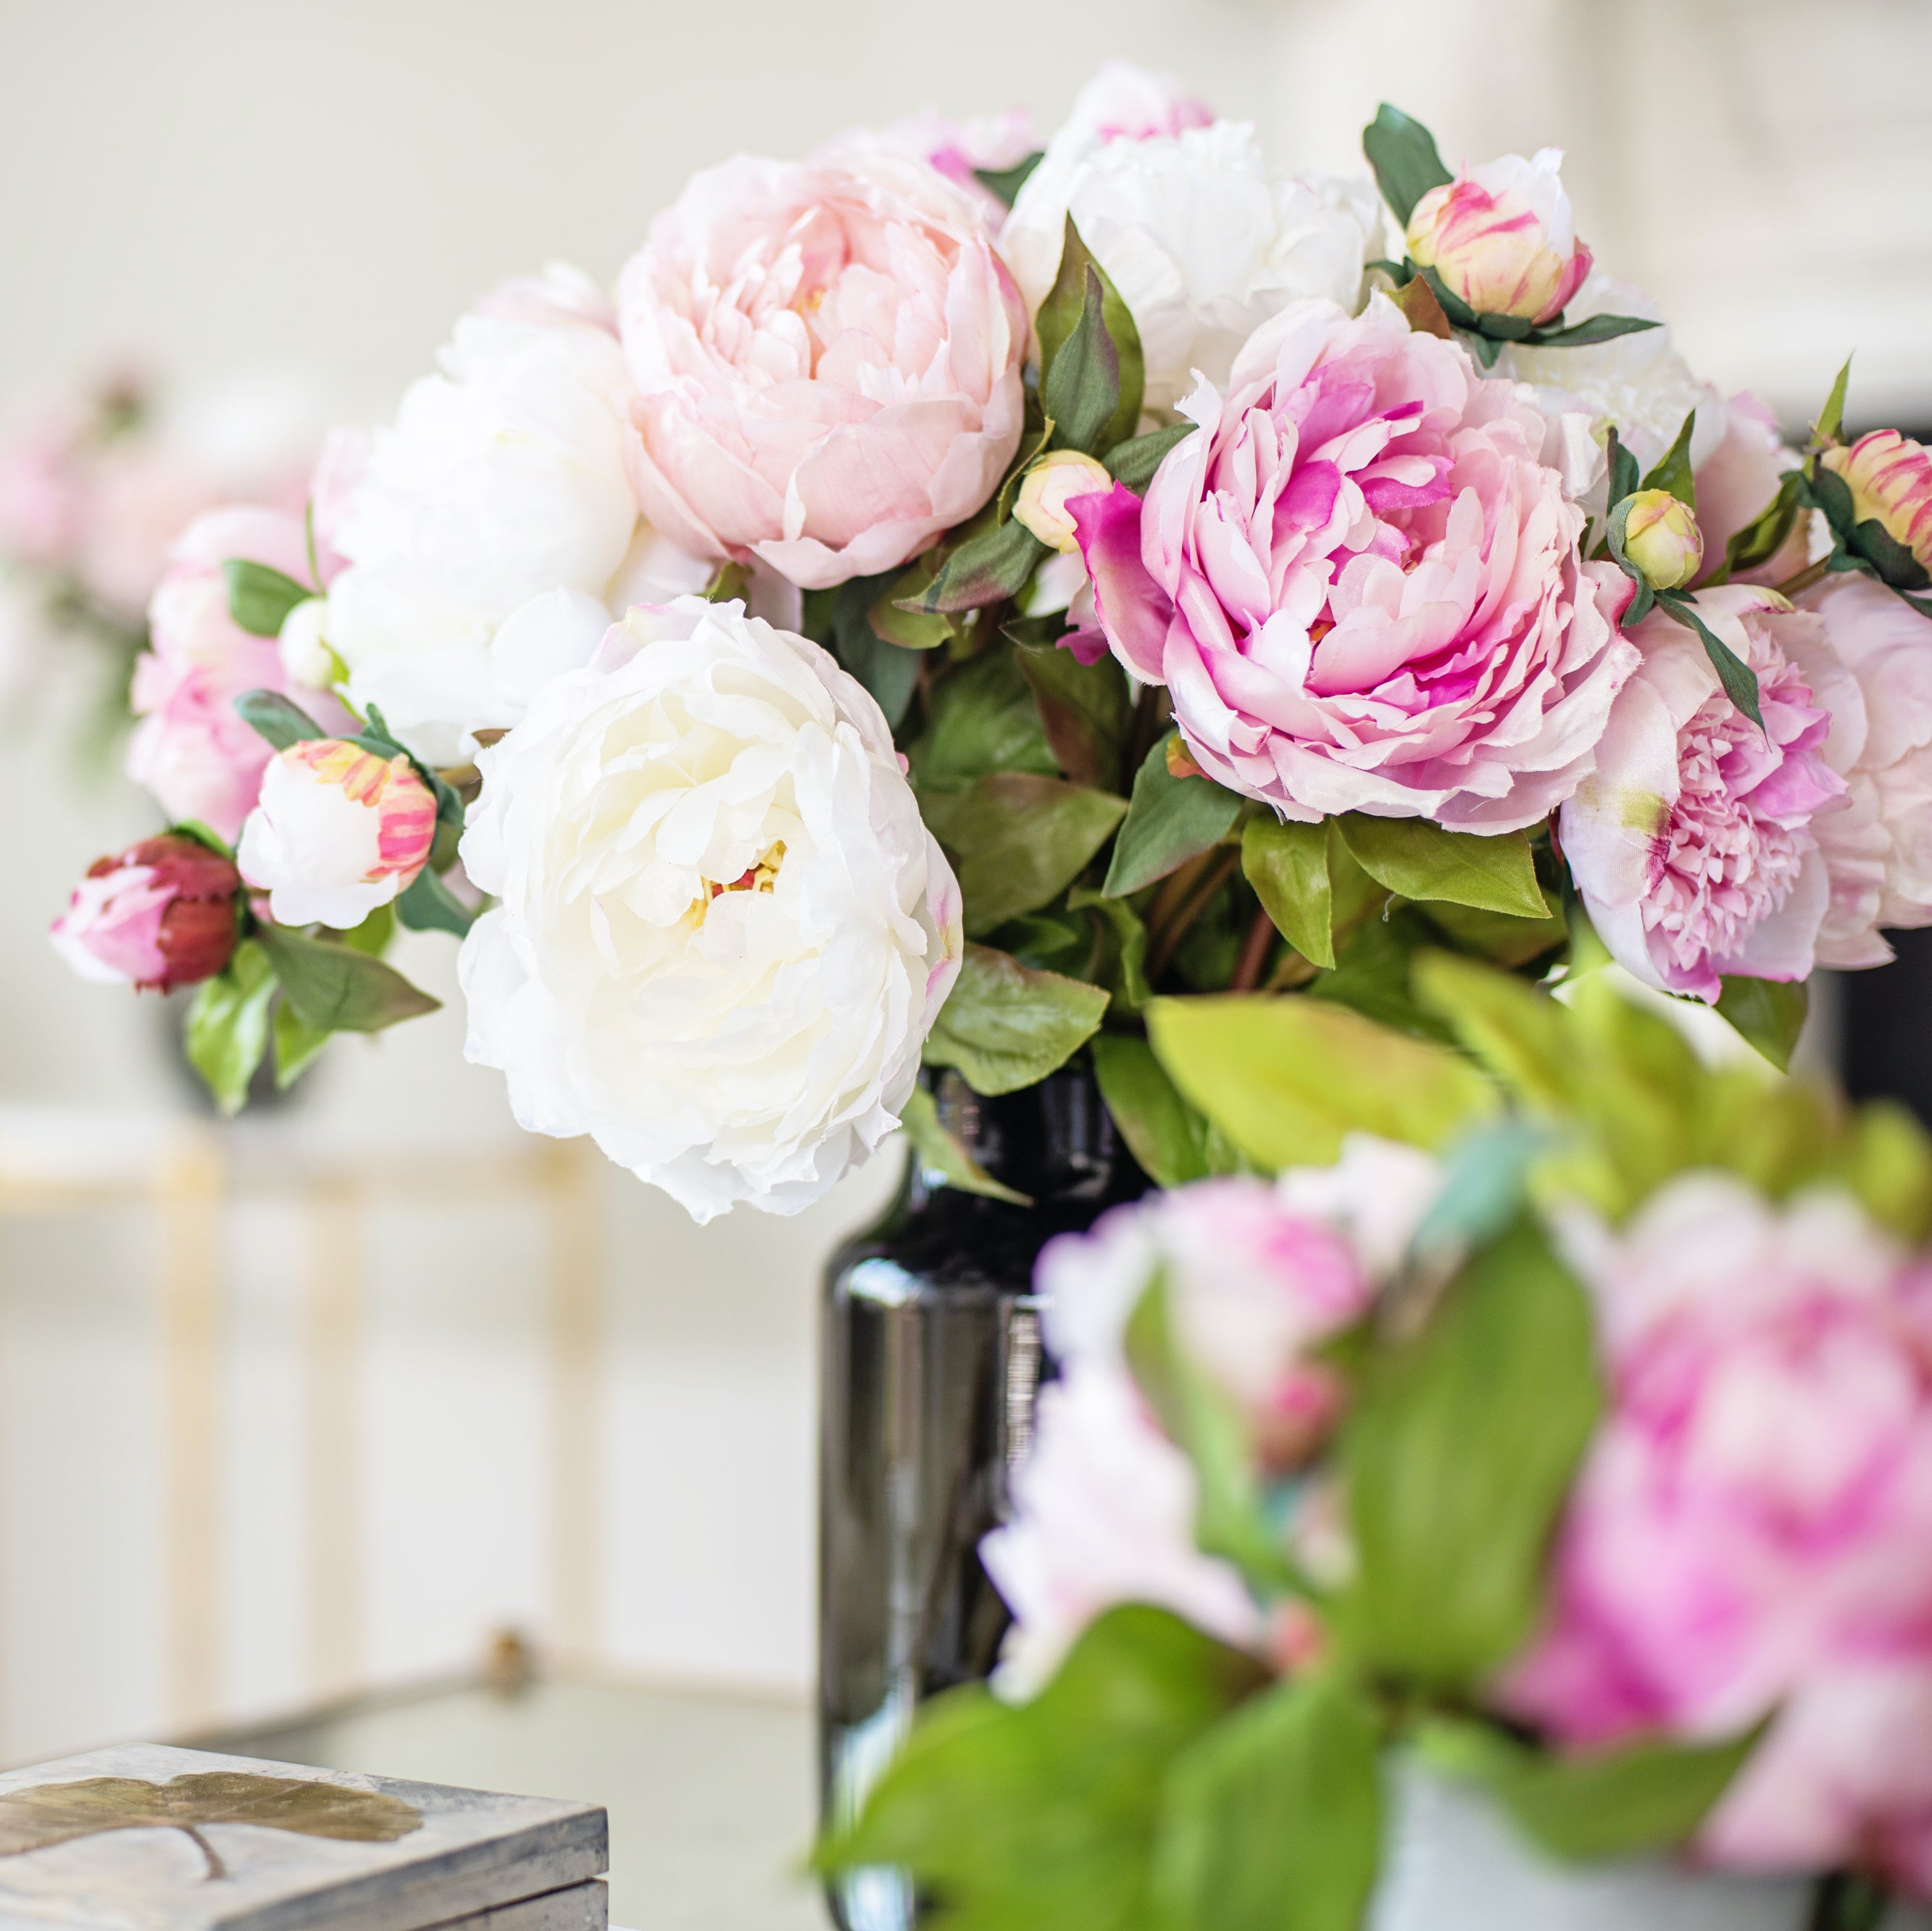 From Bud to Bloom: The Journey of Becoming The Faux Flower Company